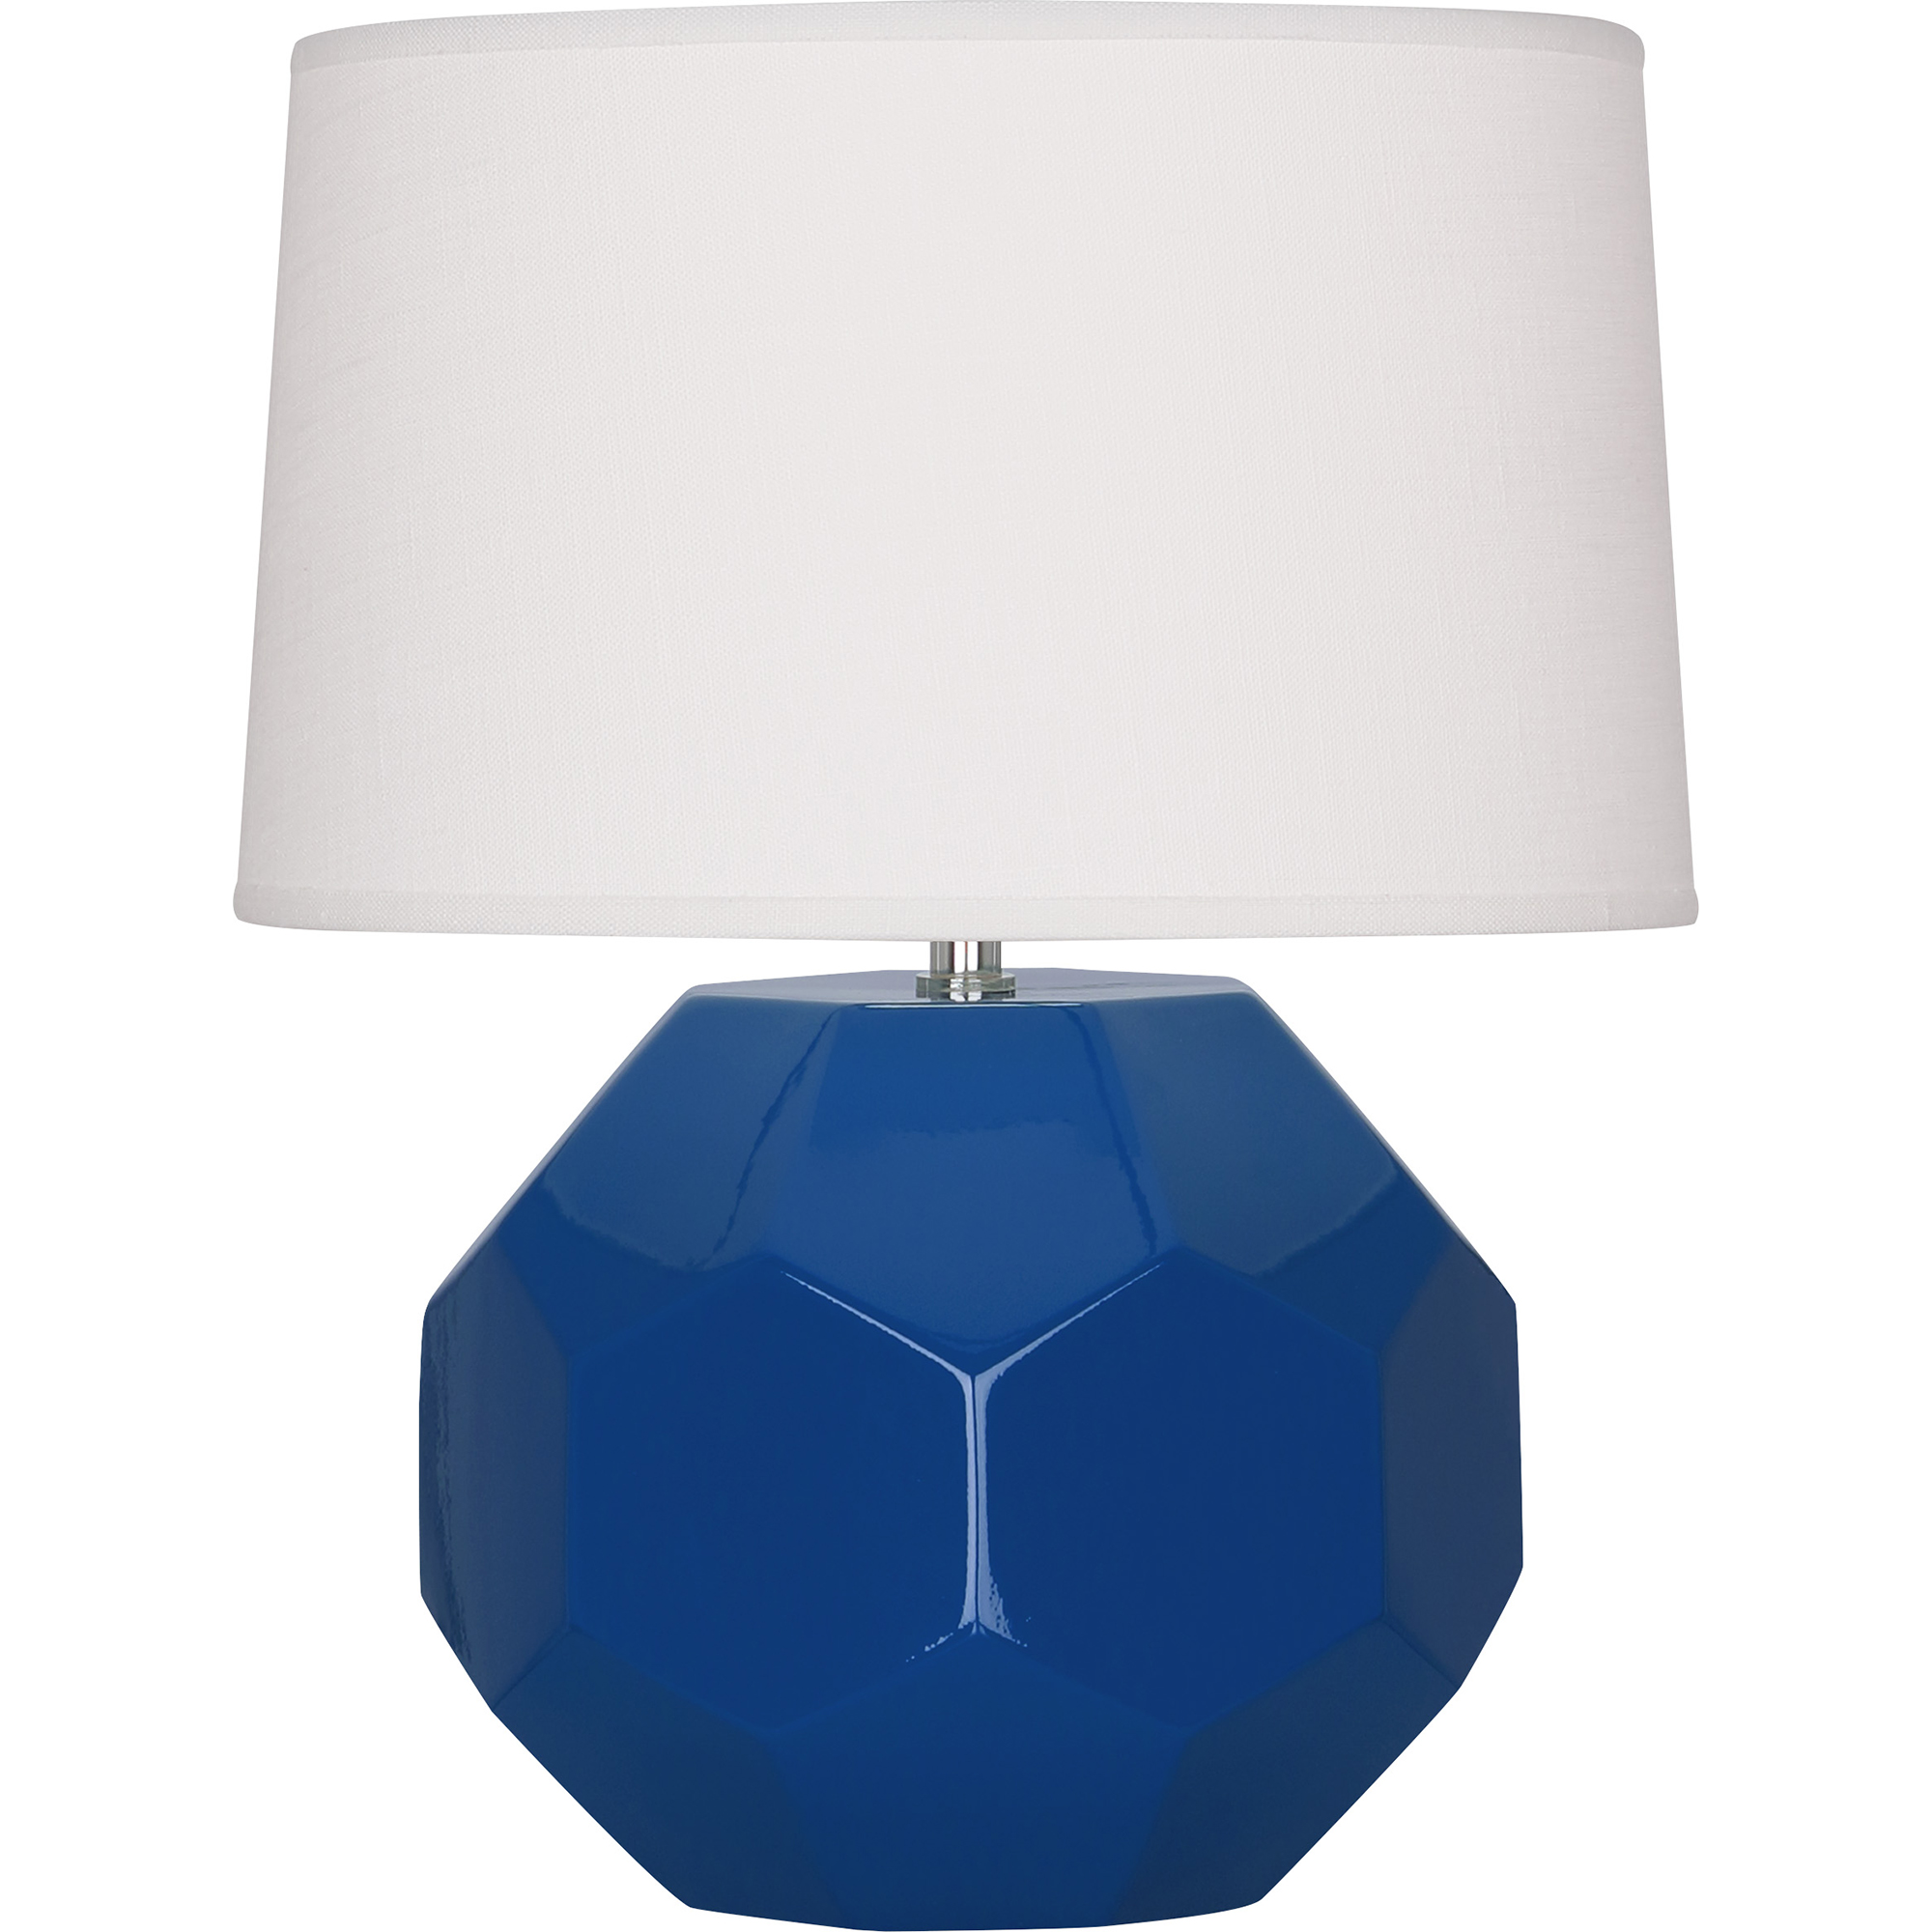 Franklin Table Lamp Style #CT01